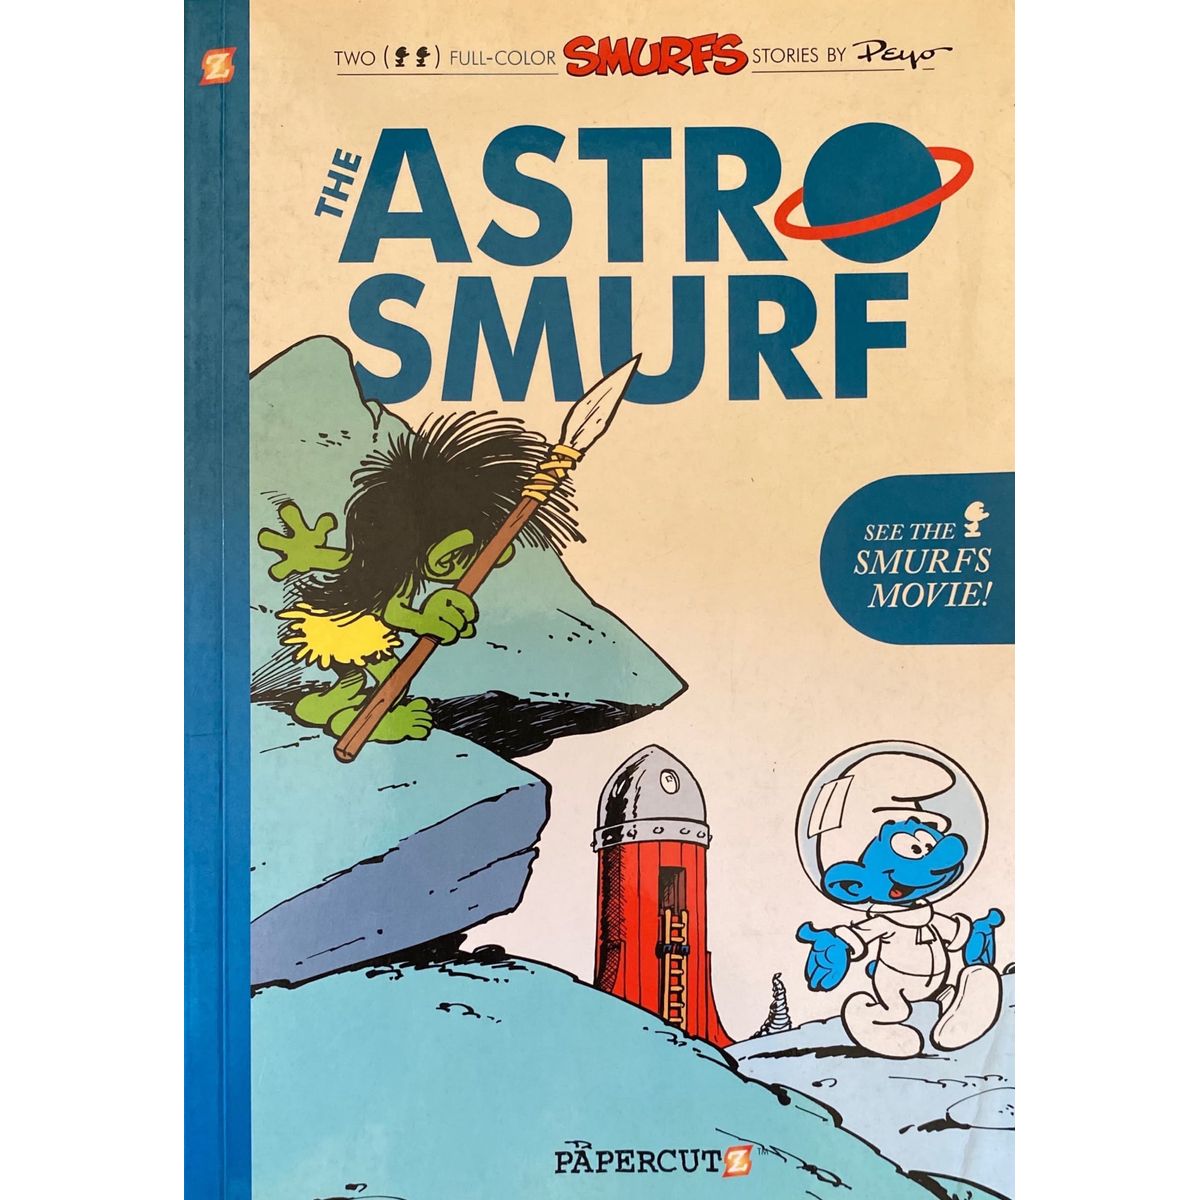 ISBN: 9781597072502 / 1597072508 - The Astro Smurf by Peyo [2011]